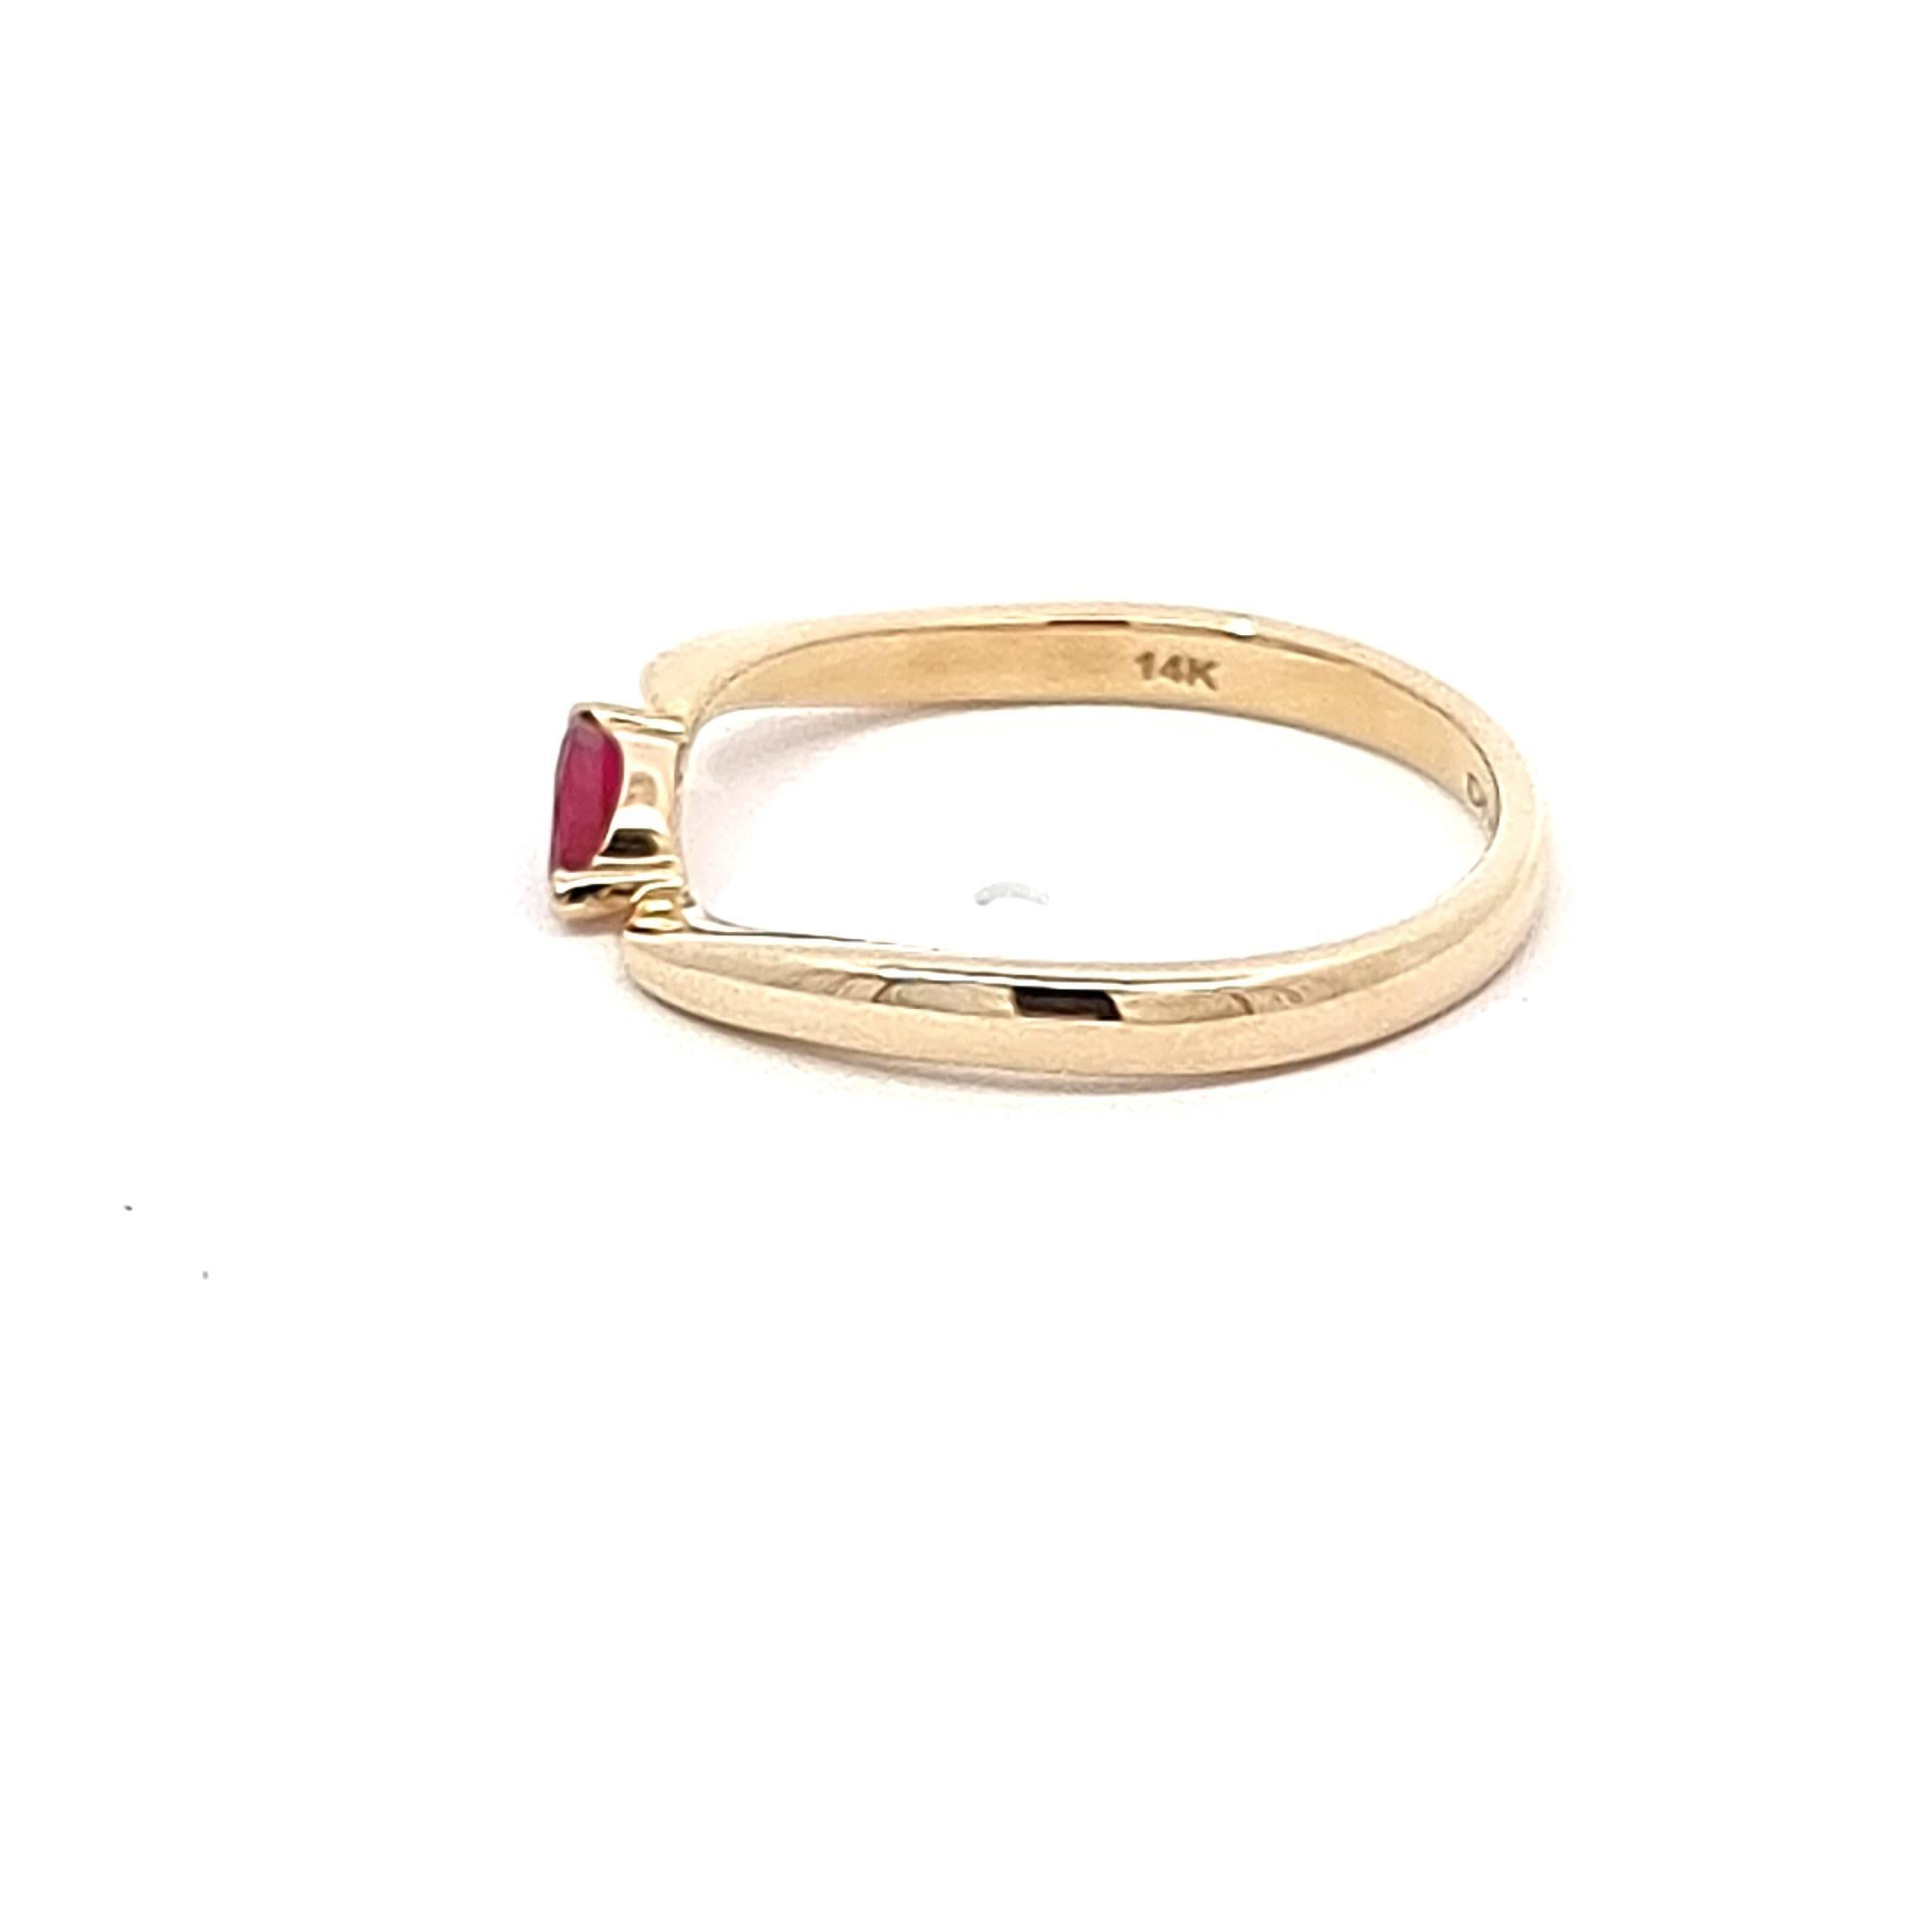 Bask in the glow of sophistication with our elegant Yellow Gold Ring, a masterpiece of finesse and warmth. The focal point is a resplendent marquise-cut Mozambique ruby, cradled in a unique twist setting that adds a touch of artistic flair. The warm